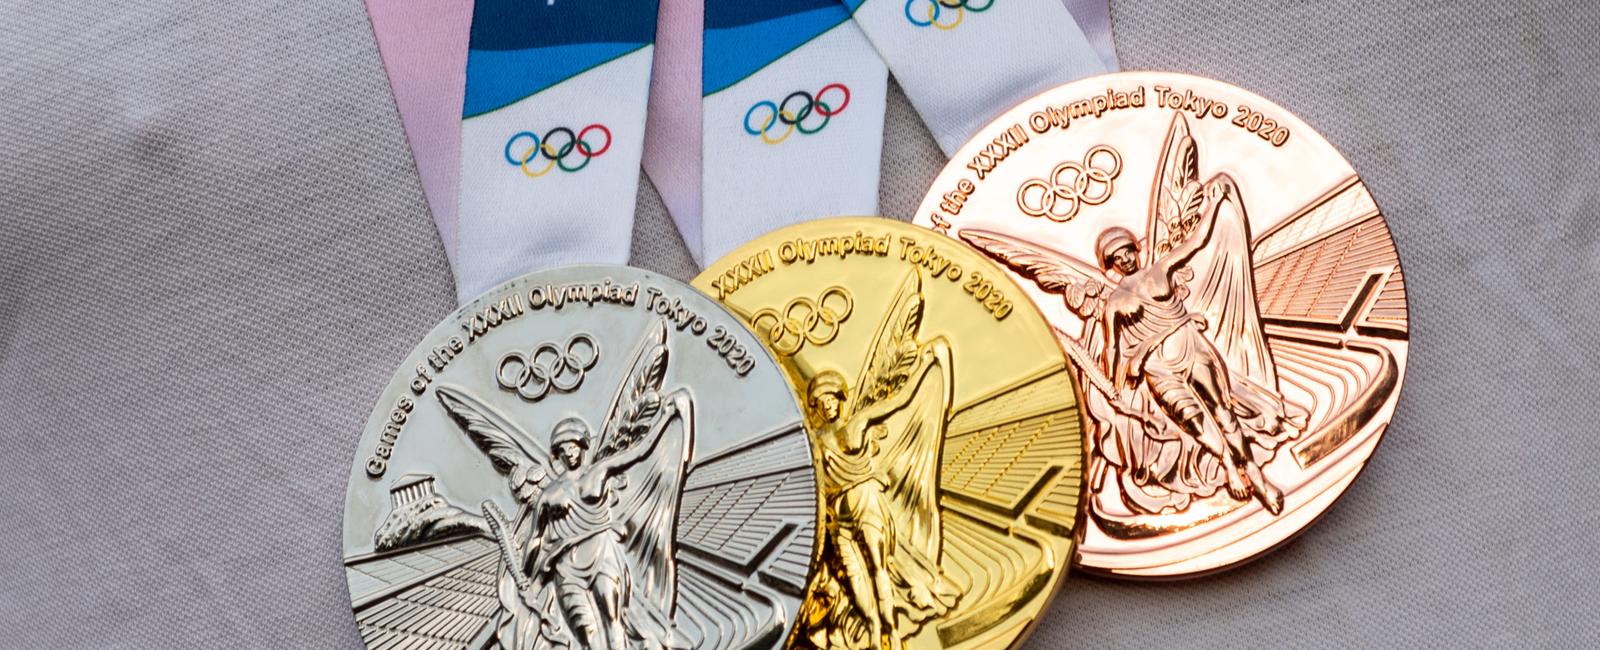 Olympic gold medals are actually made mostly of silver